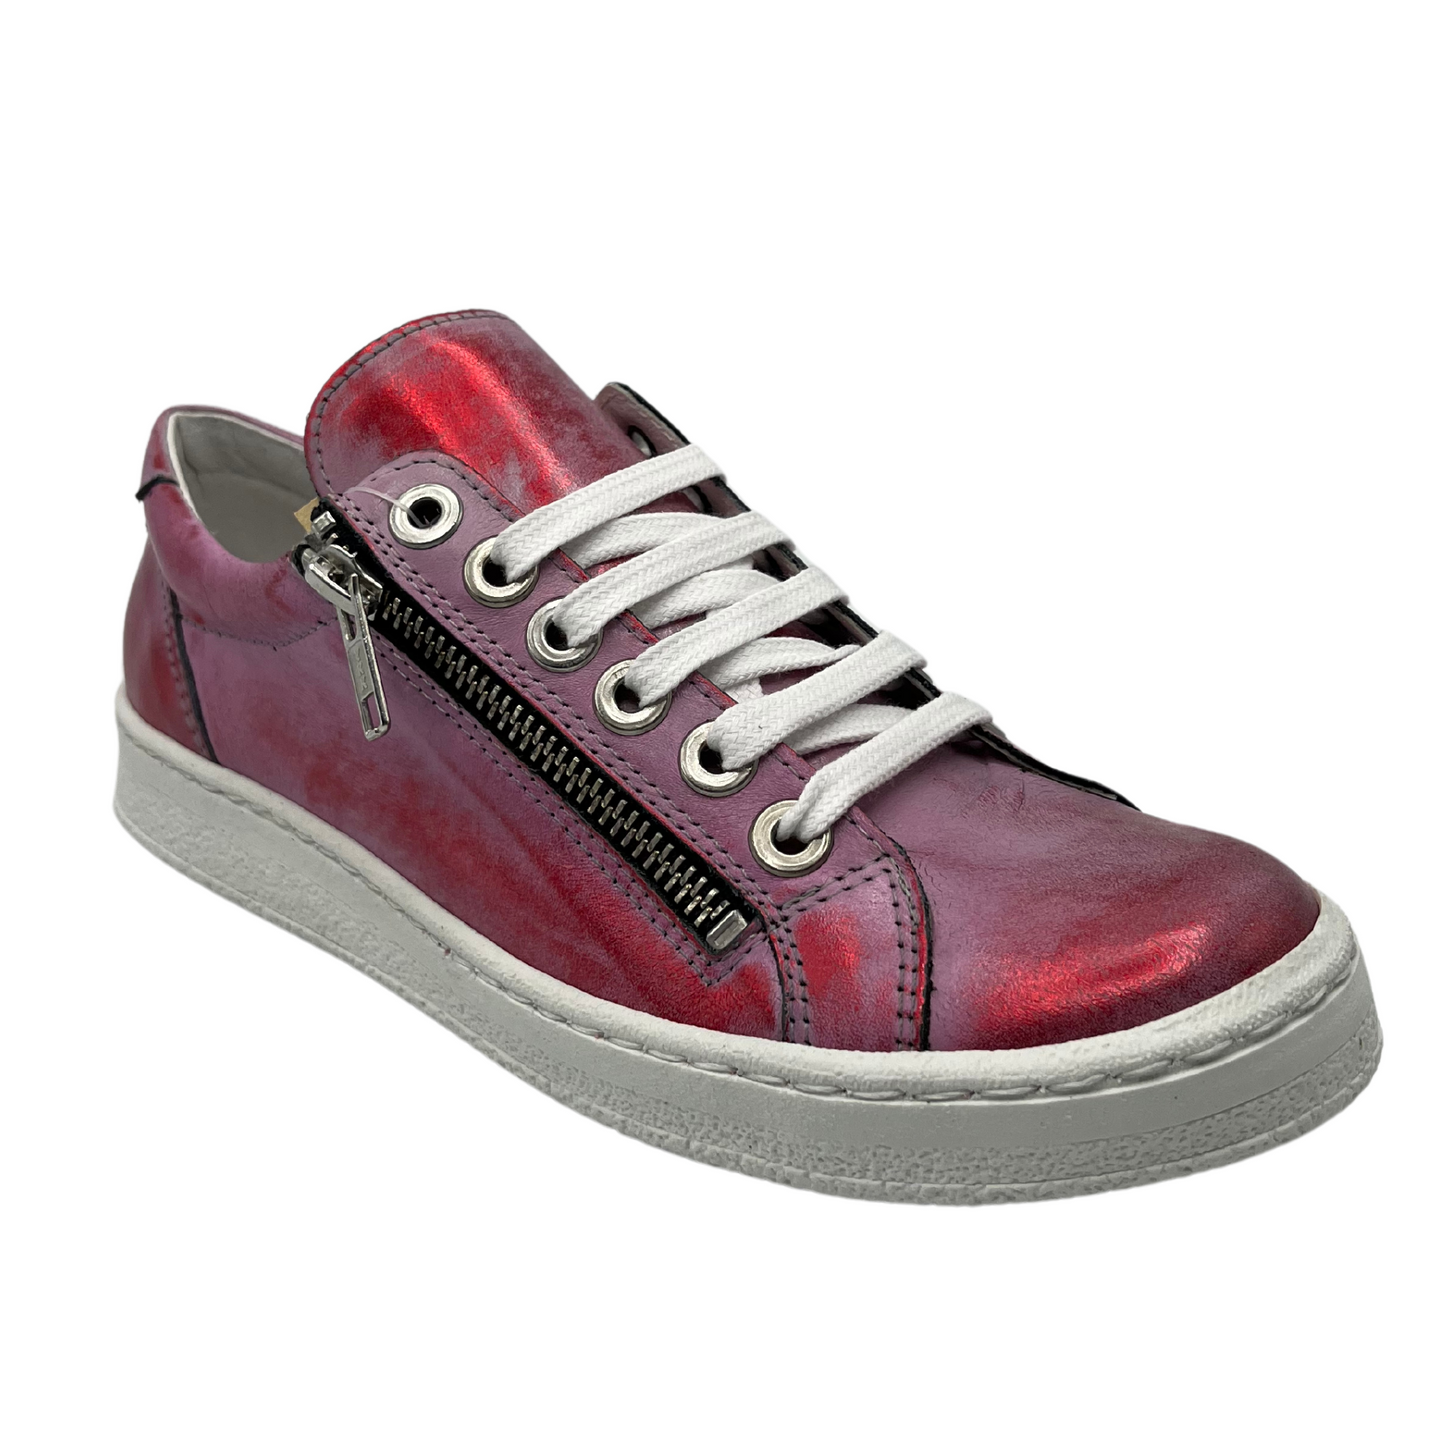 45 degree angled view of metallic red leather sneaker with white laces and side zipper closure